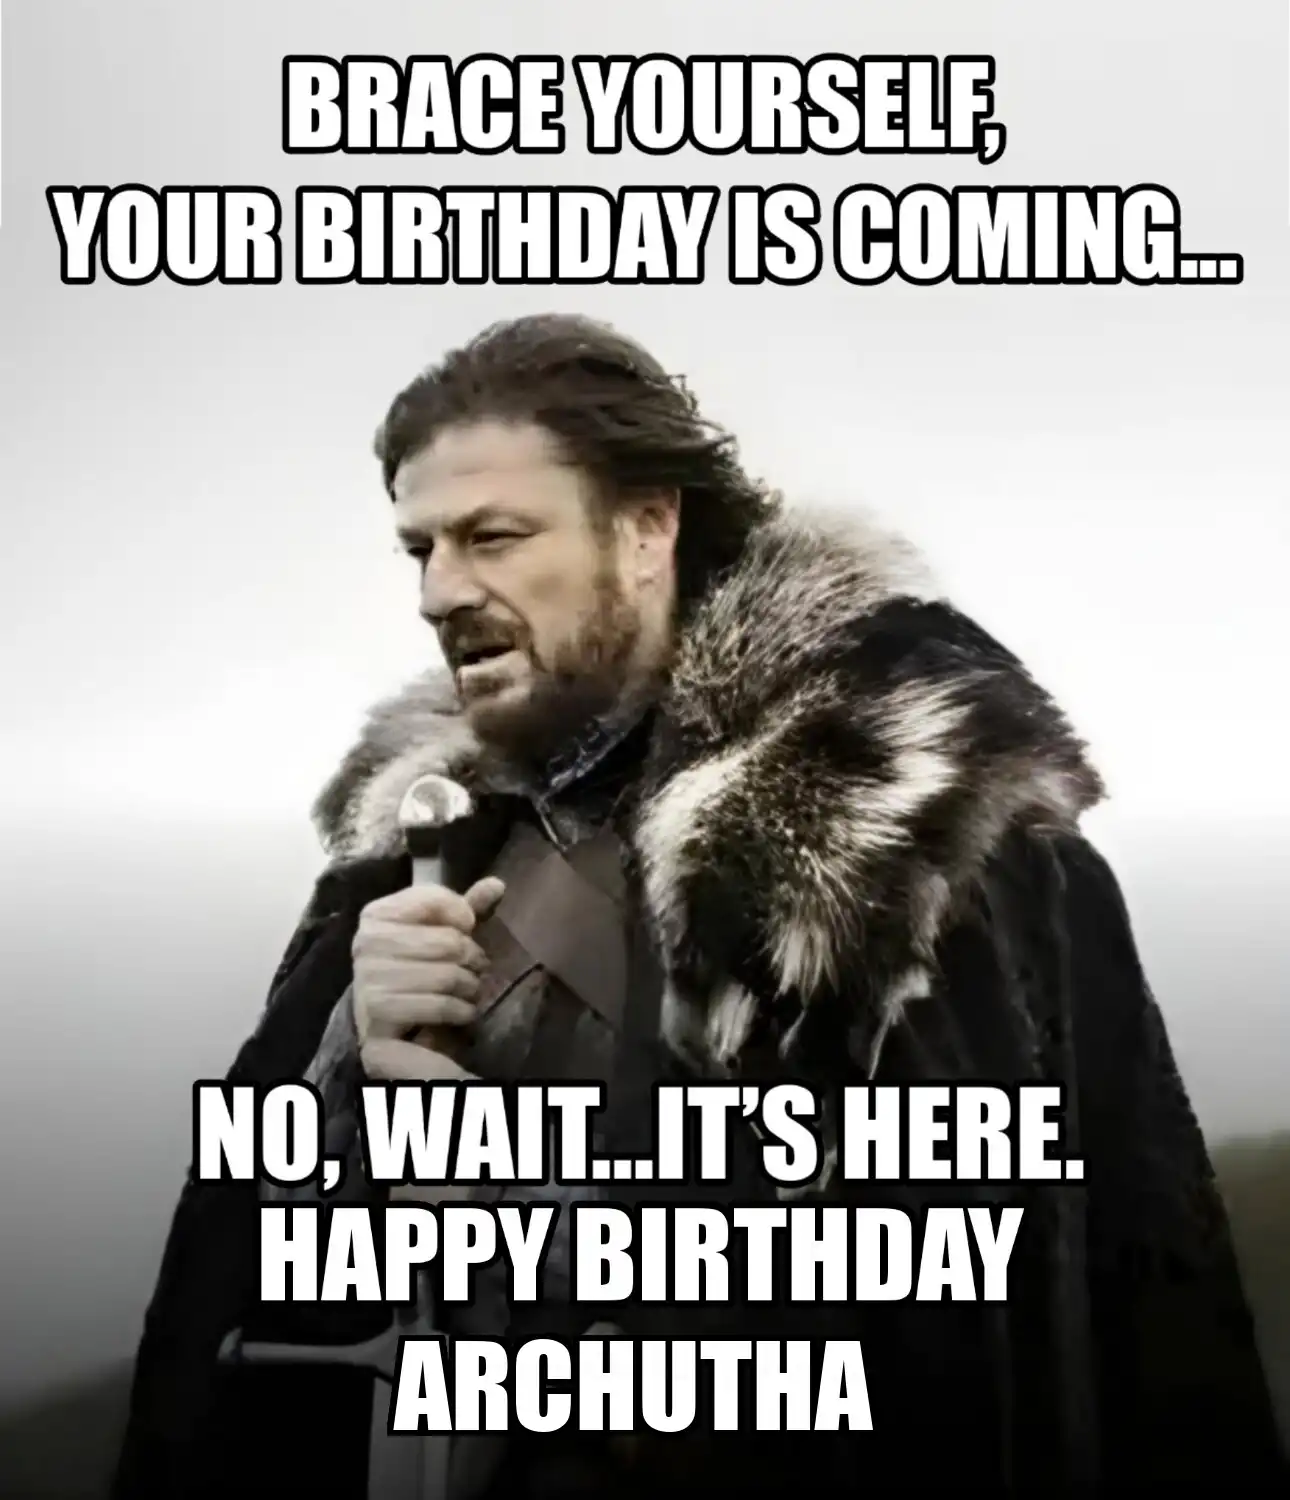 Happy Birthday Archutha Brace Yourself Your Birthday Is Coming Meme